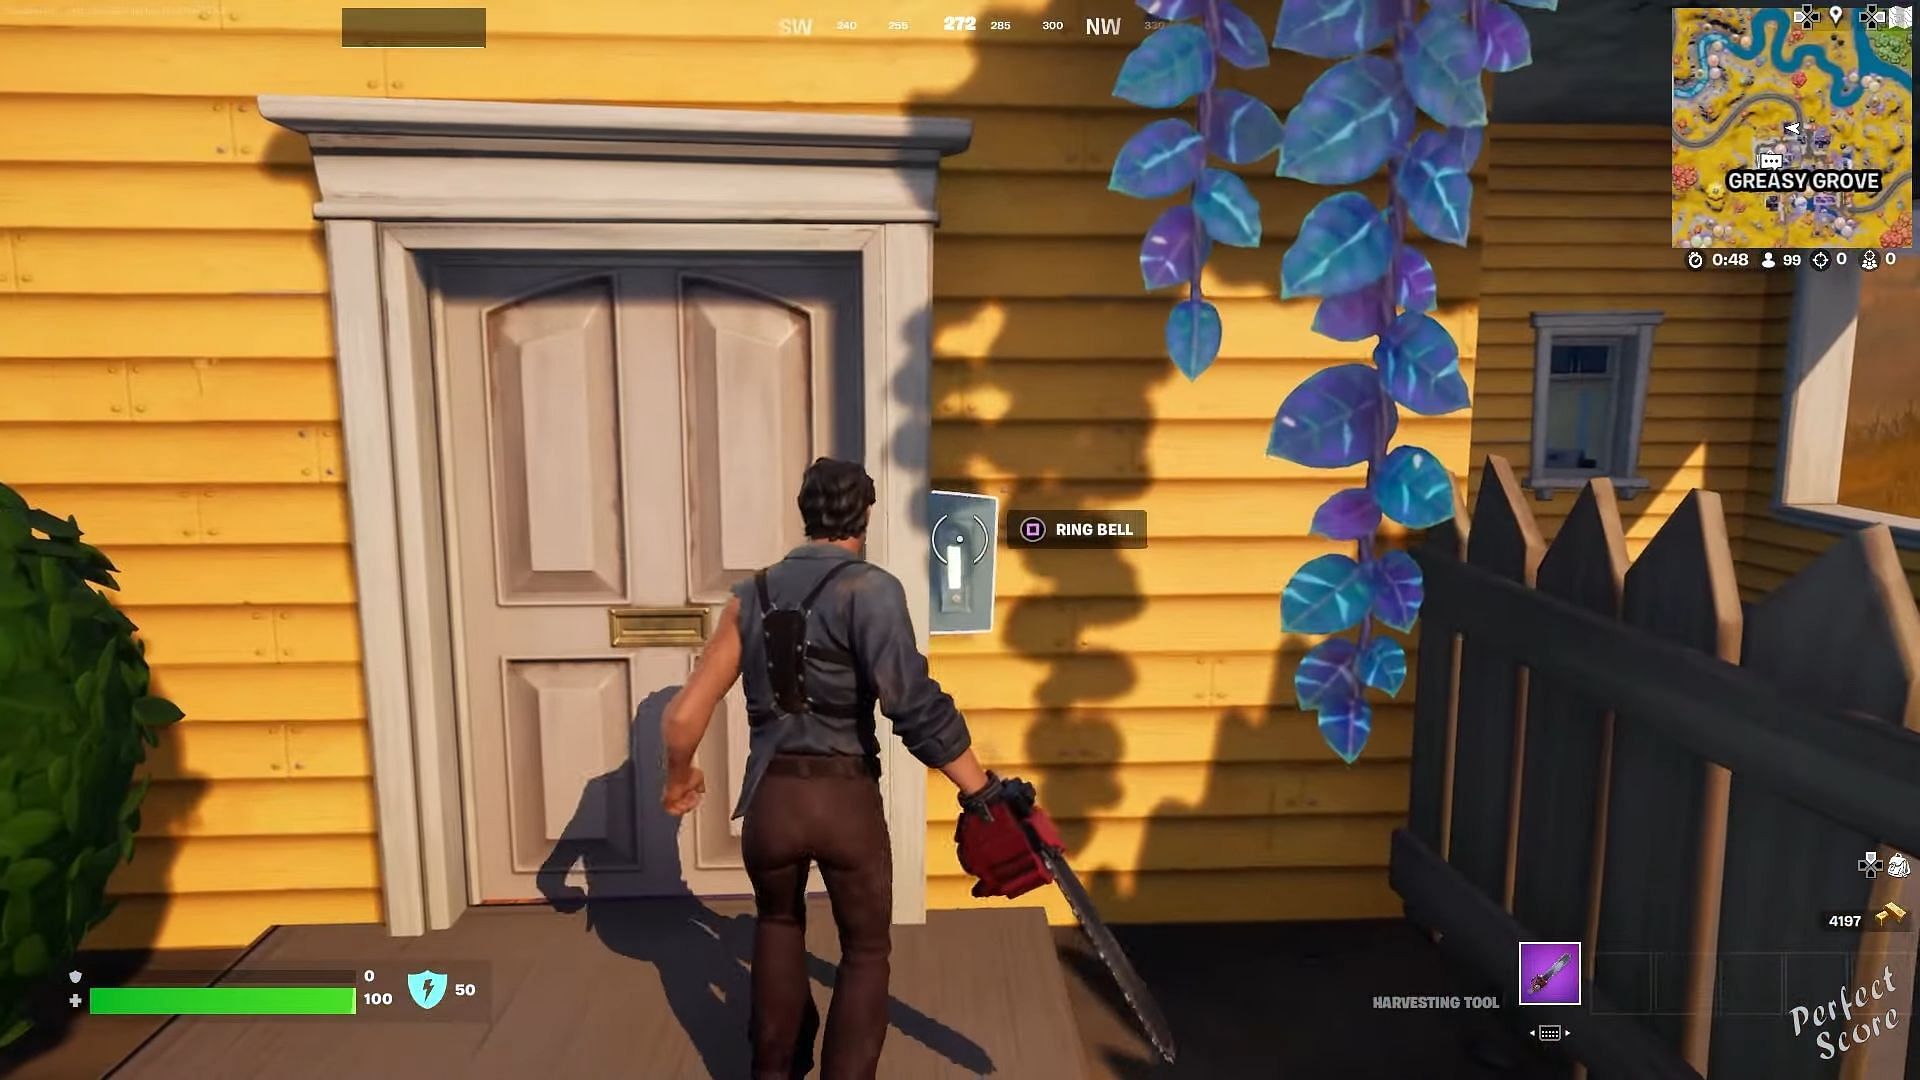 To ring a doorbell until it breaks, simply interact with it multiple times (Image via Epic Games)